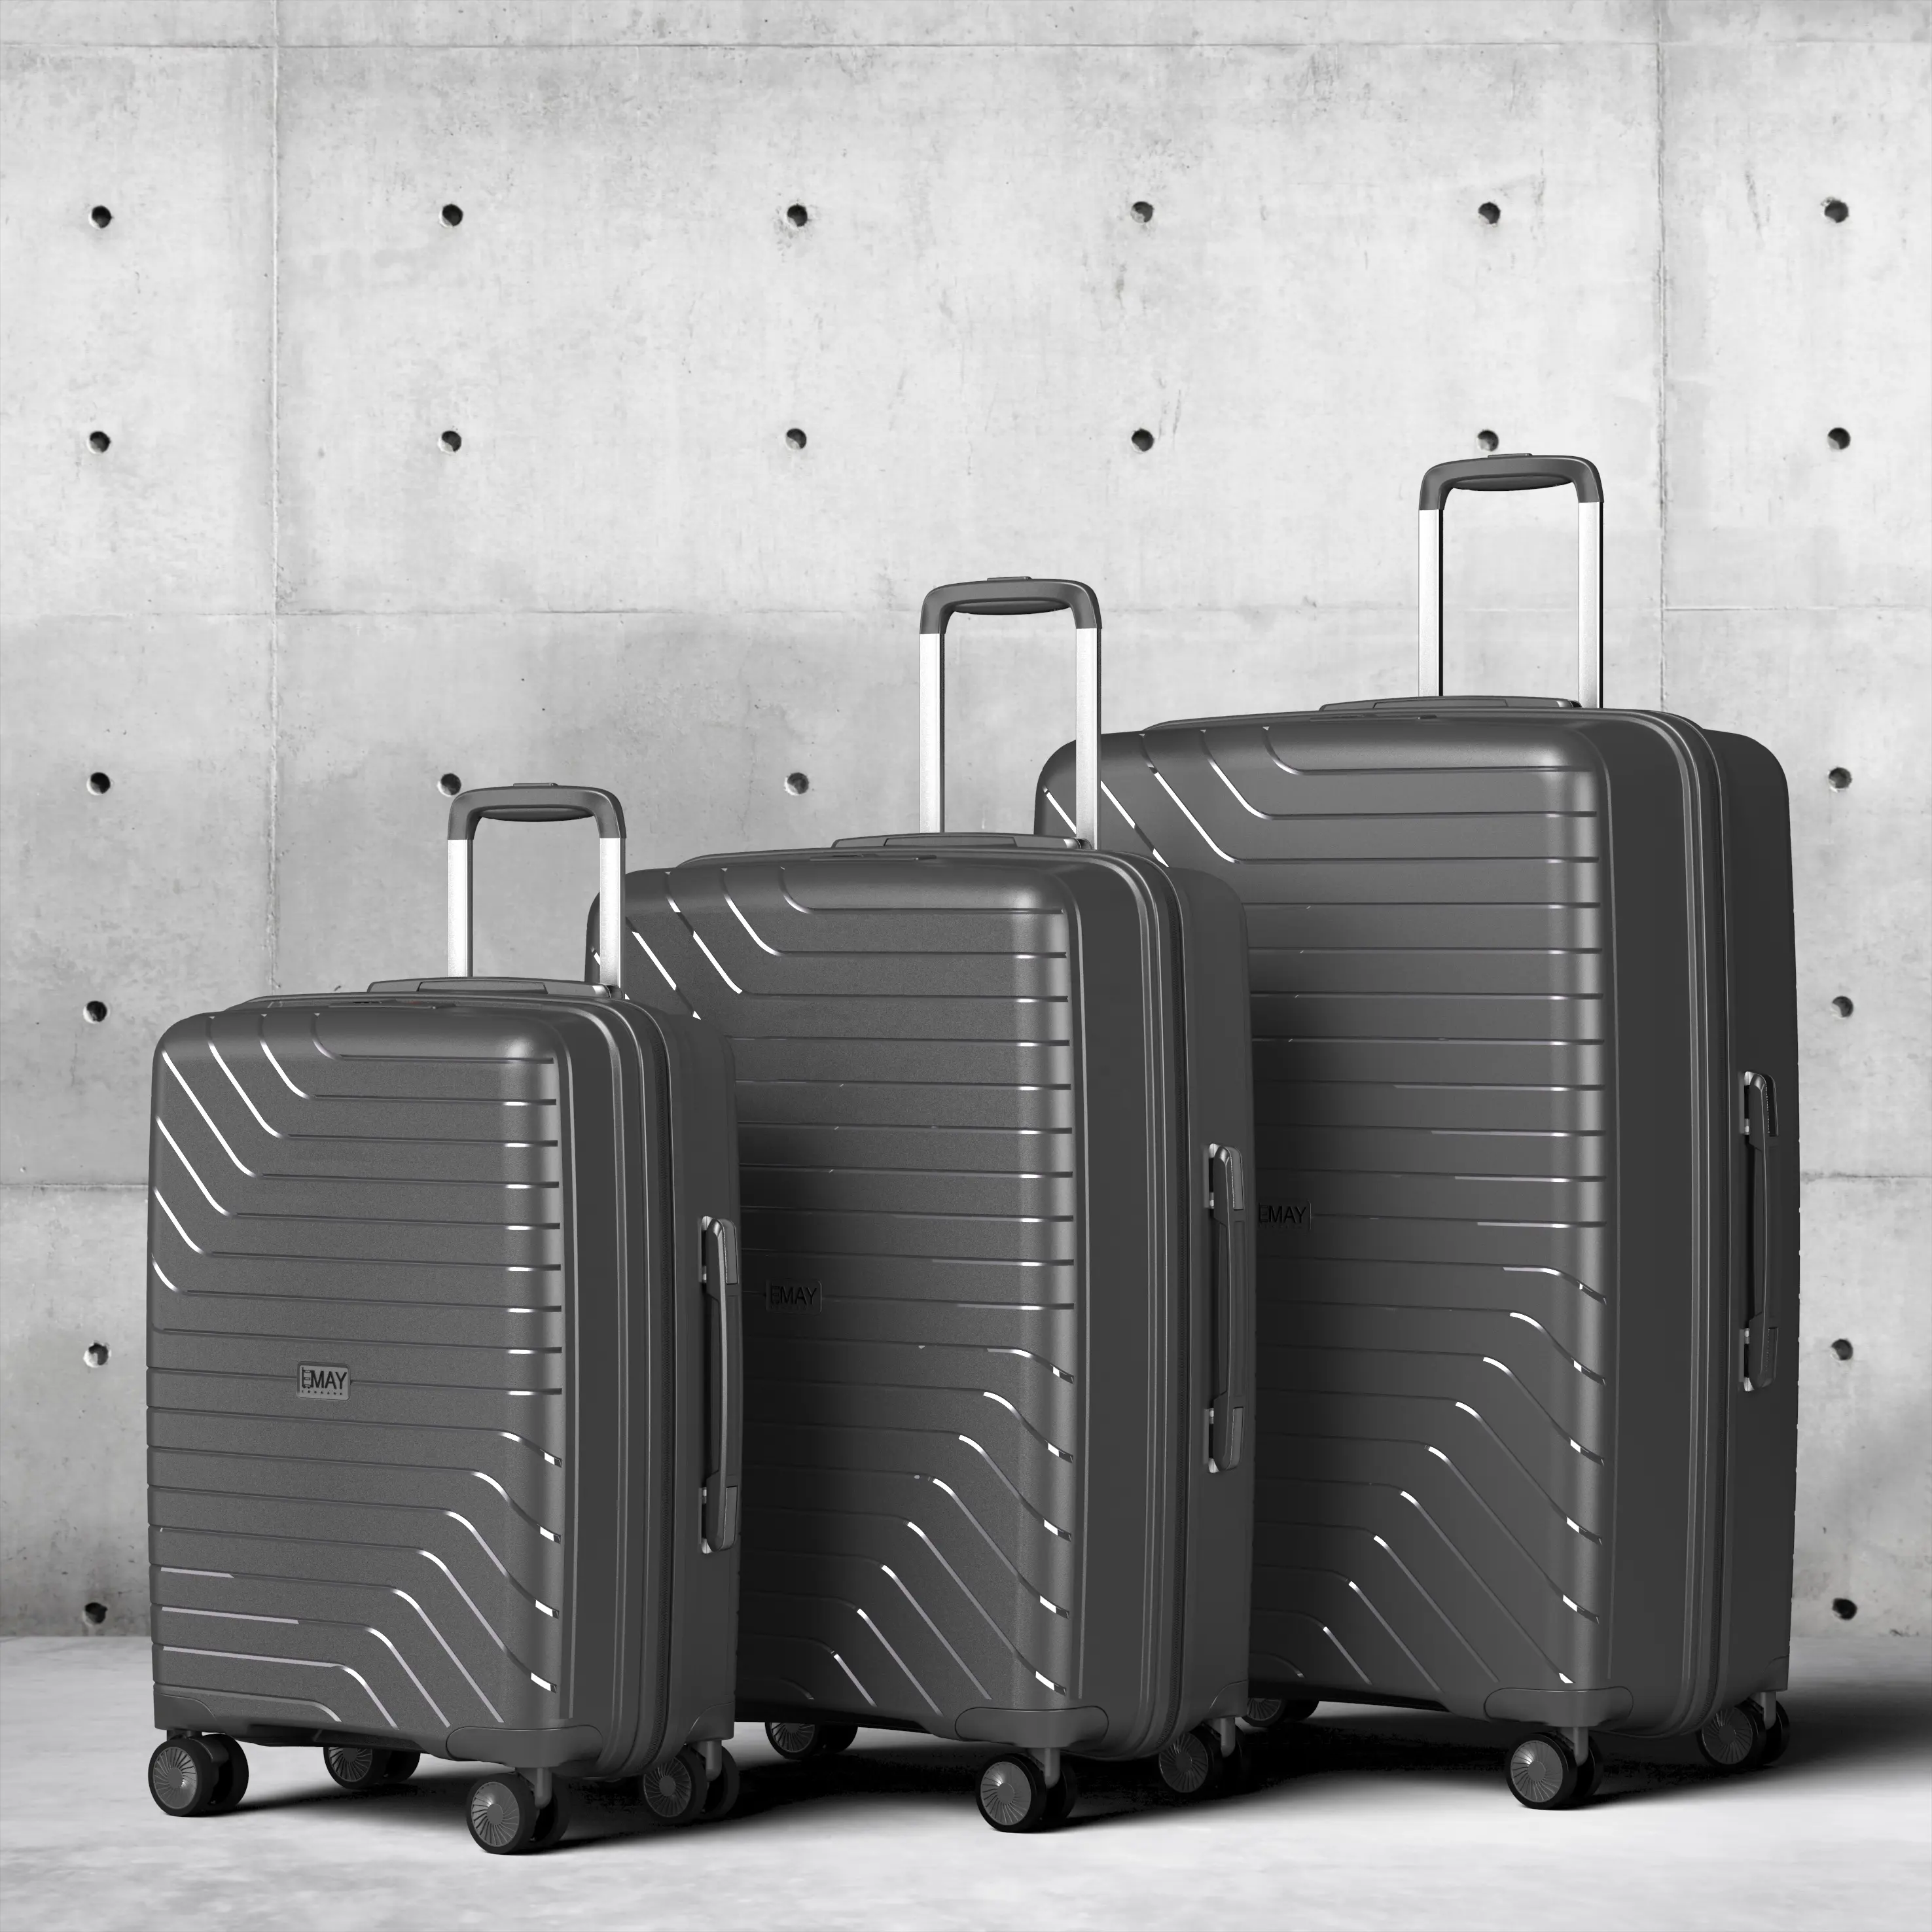 Classic Striated PP Injection Hard Trolley Kofferset Luggage Suitcases Sets Travel Suitcase